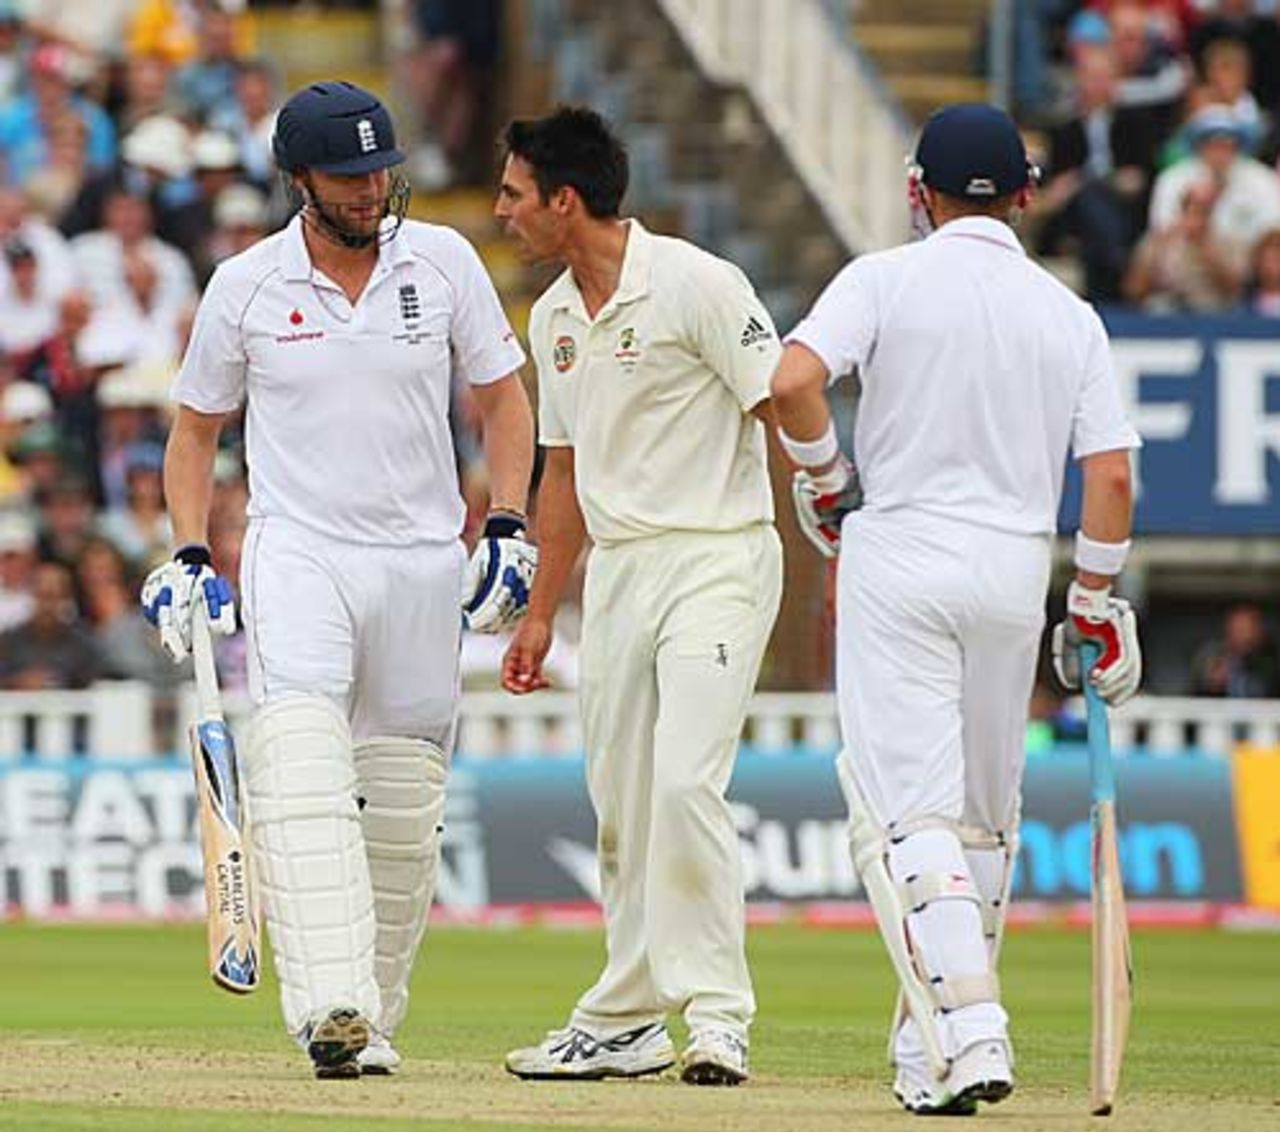 Mitchell Johnson has a word with Andrew Flintoff, England v Australia, 3rd Test, Edgbaston, 4th day, August 2, 2009